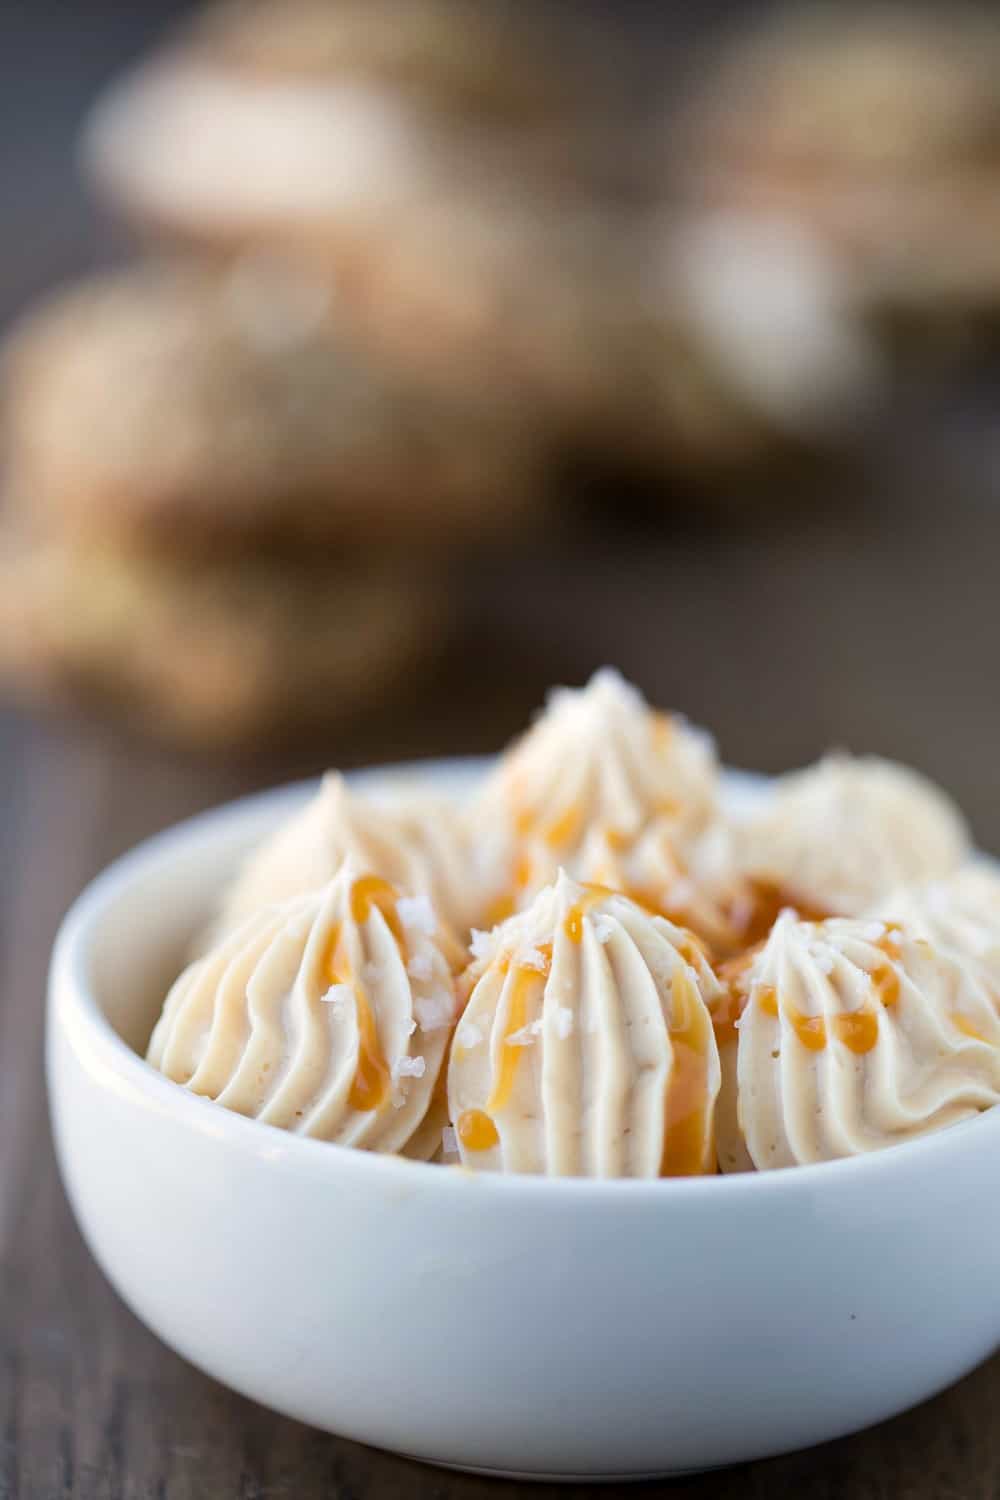 Piped caramel frosting in a white dish.